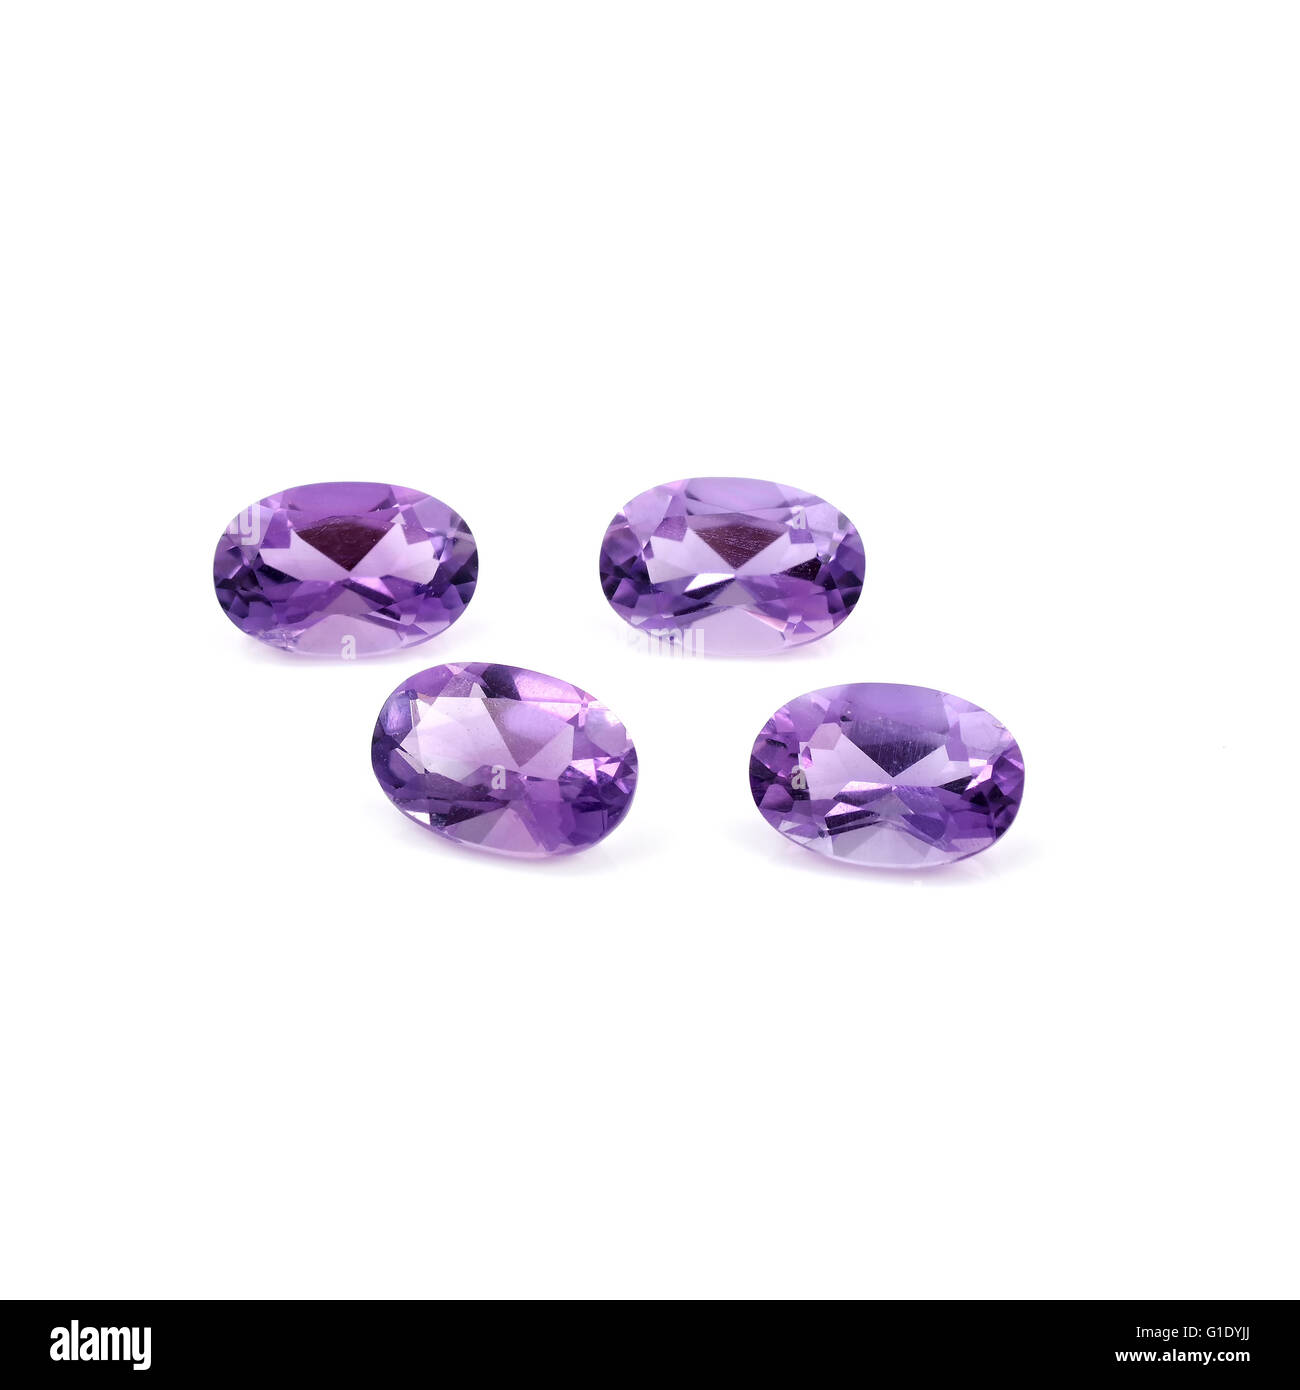 Brazilian Faceted Amethyst on a white background. Stock Photo